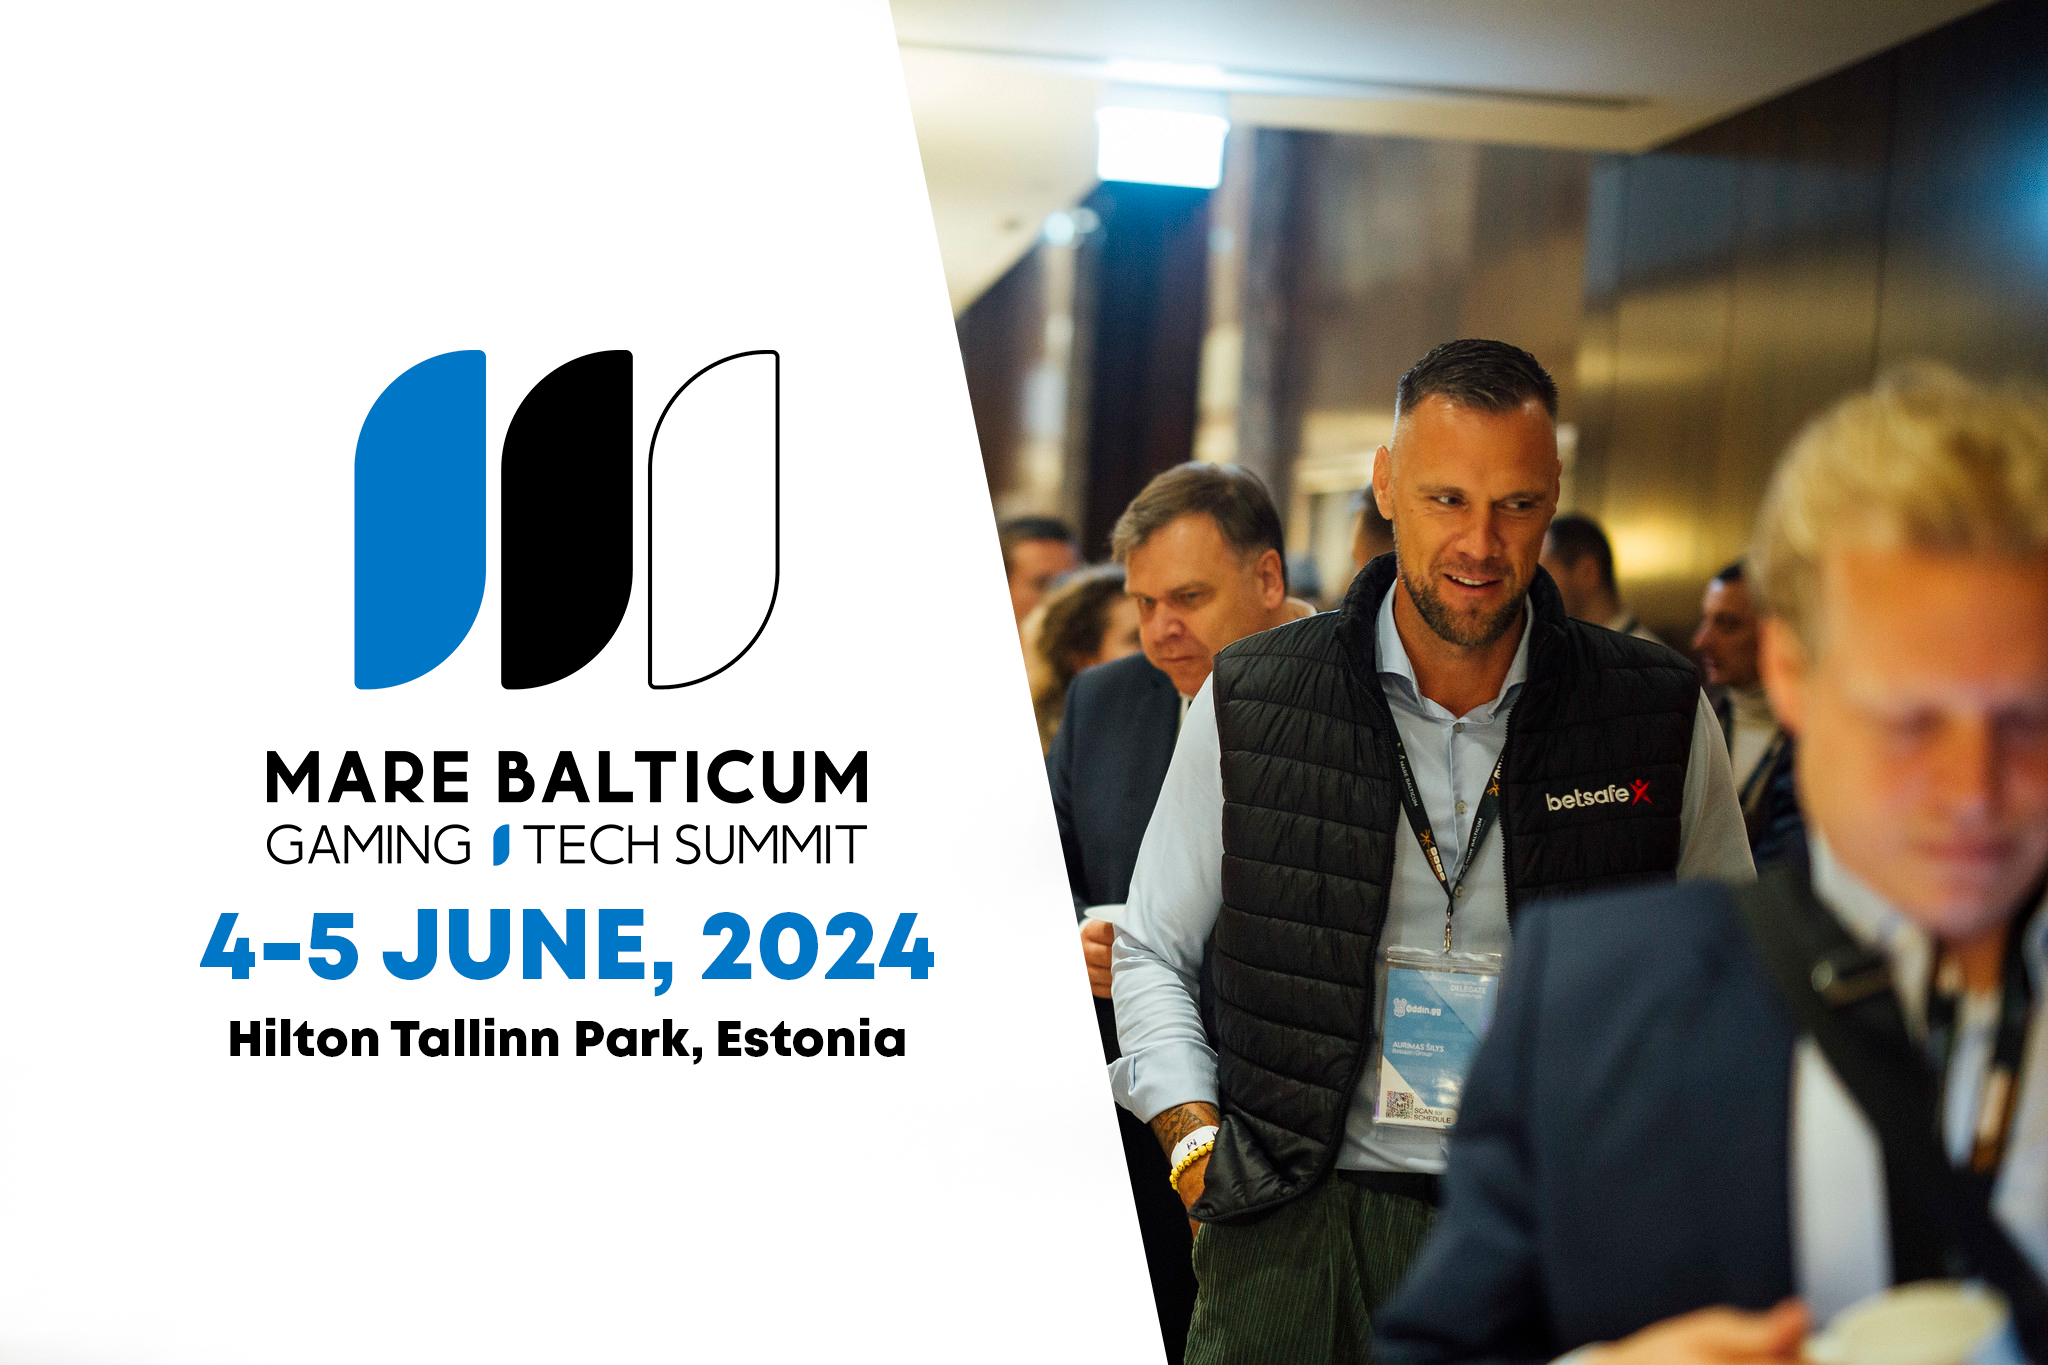 This summit has carved out a niche as a crucial gathering for industry leaders, offering a window into the future of gaming and tech in the Baltic region and beyond.